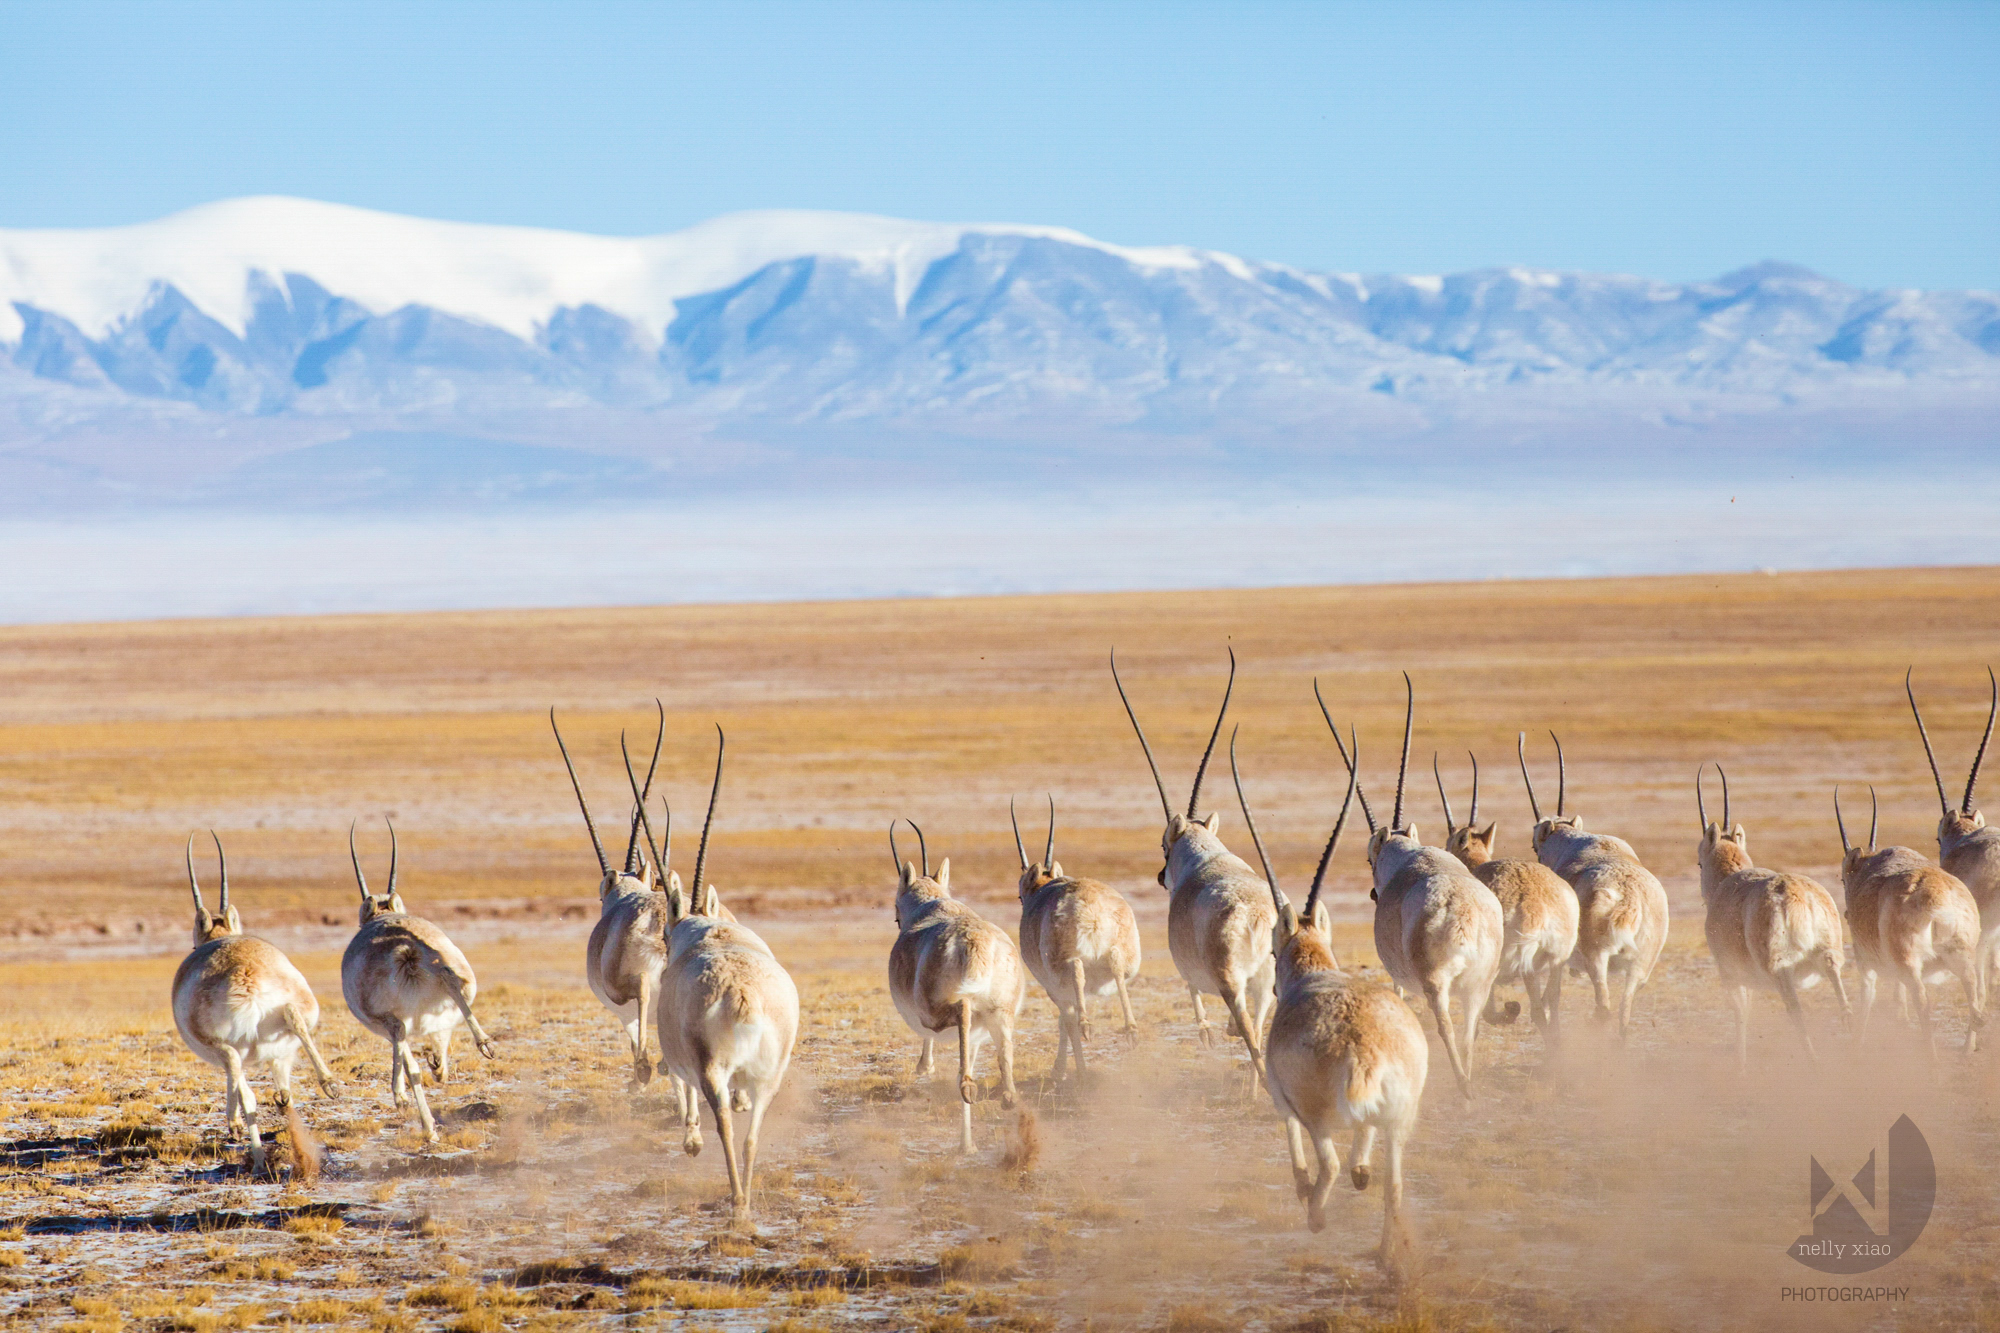   Tibetan antelopes running free in the vast Tibetan plateau once again &nbsp; (after more than a decade of brutal battle between the Mountain patrol and hunters to save the species from almost extinction)  Kekexili Wildlife Conservation, November 20